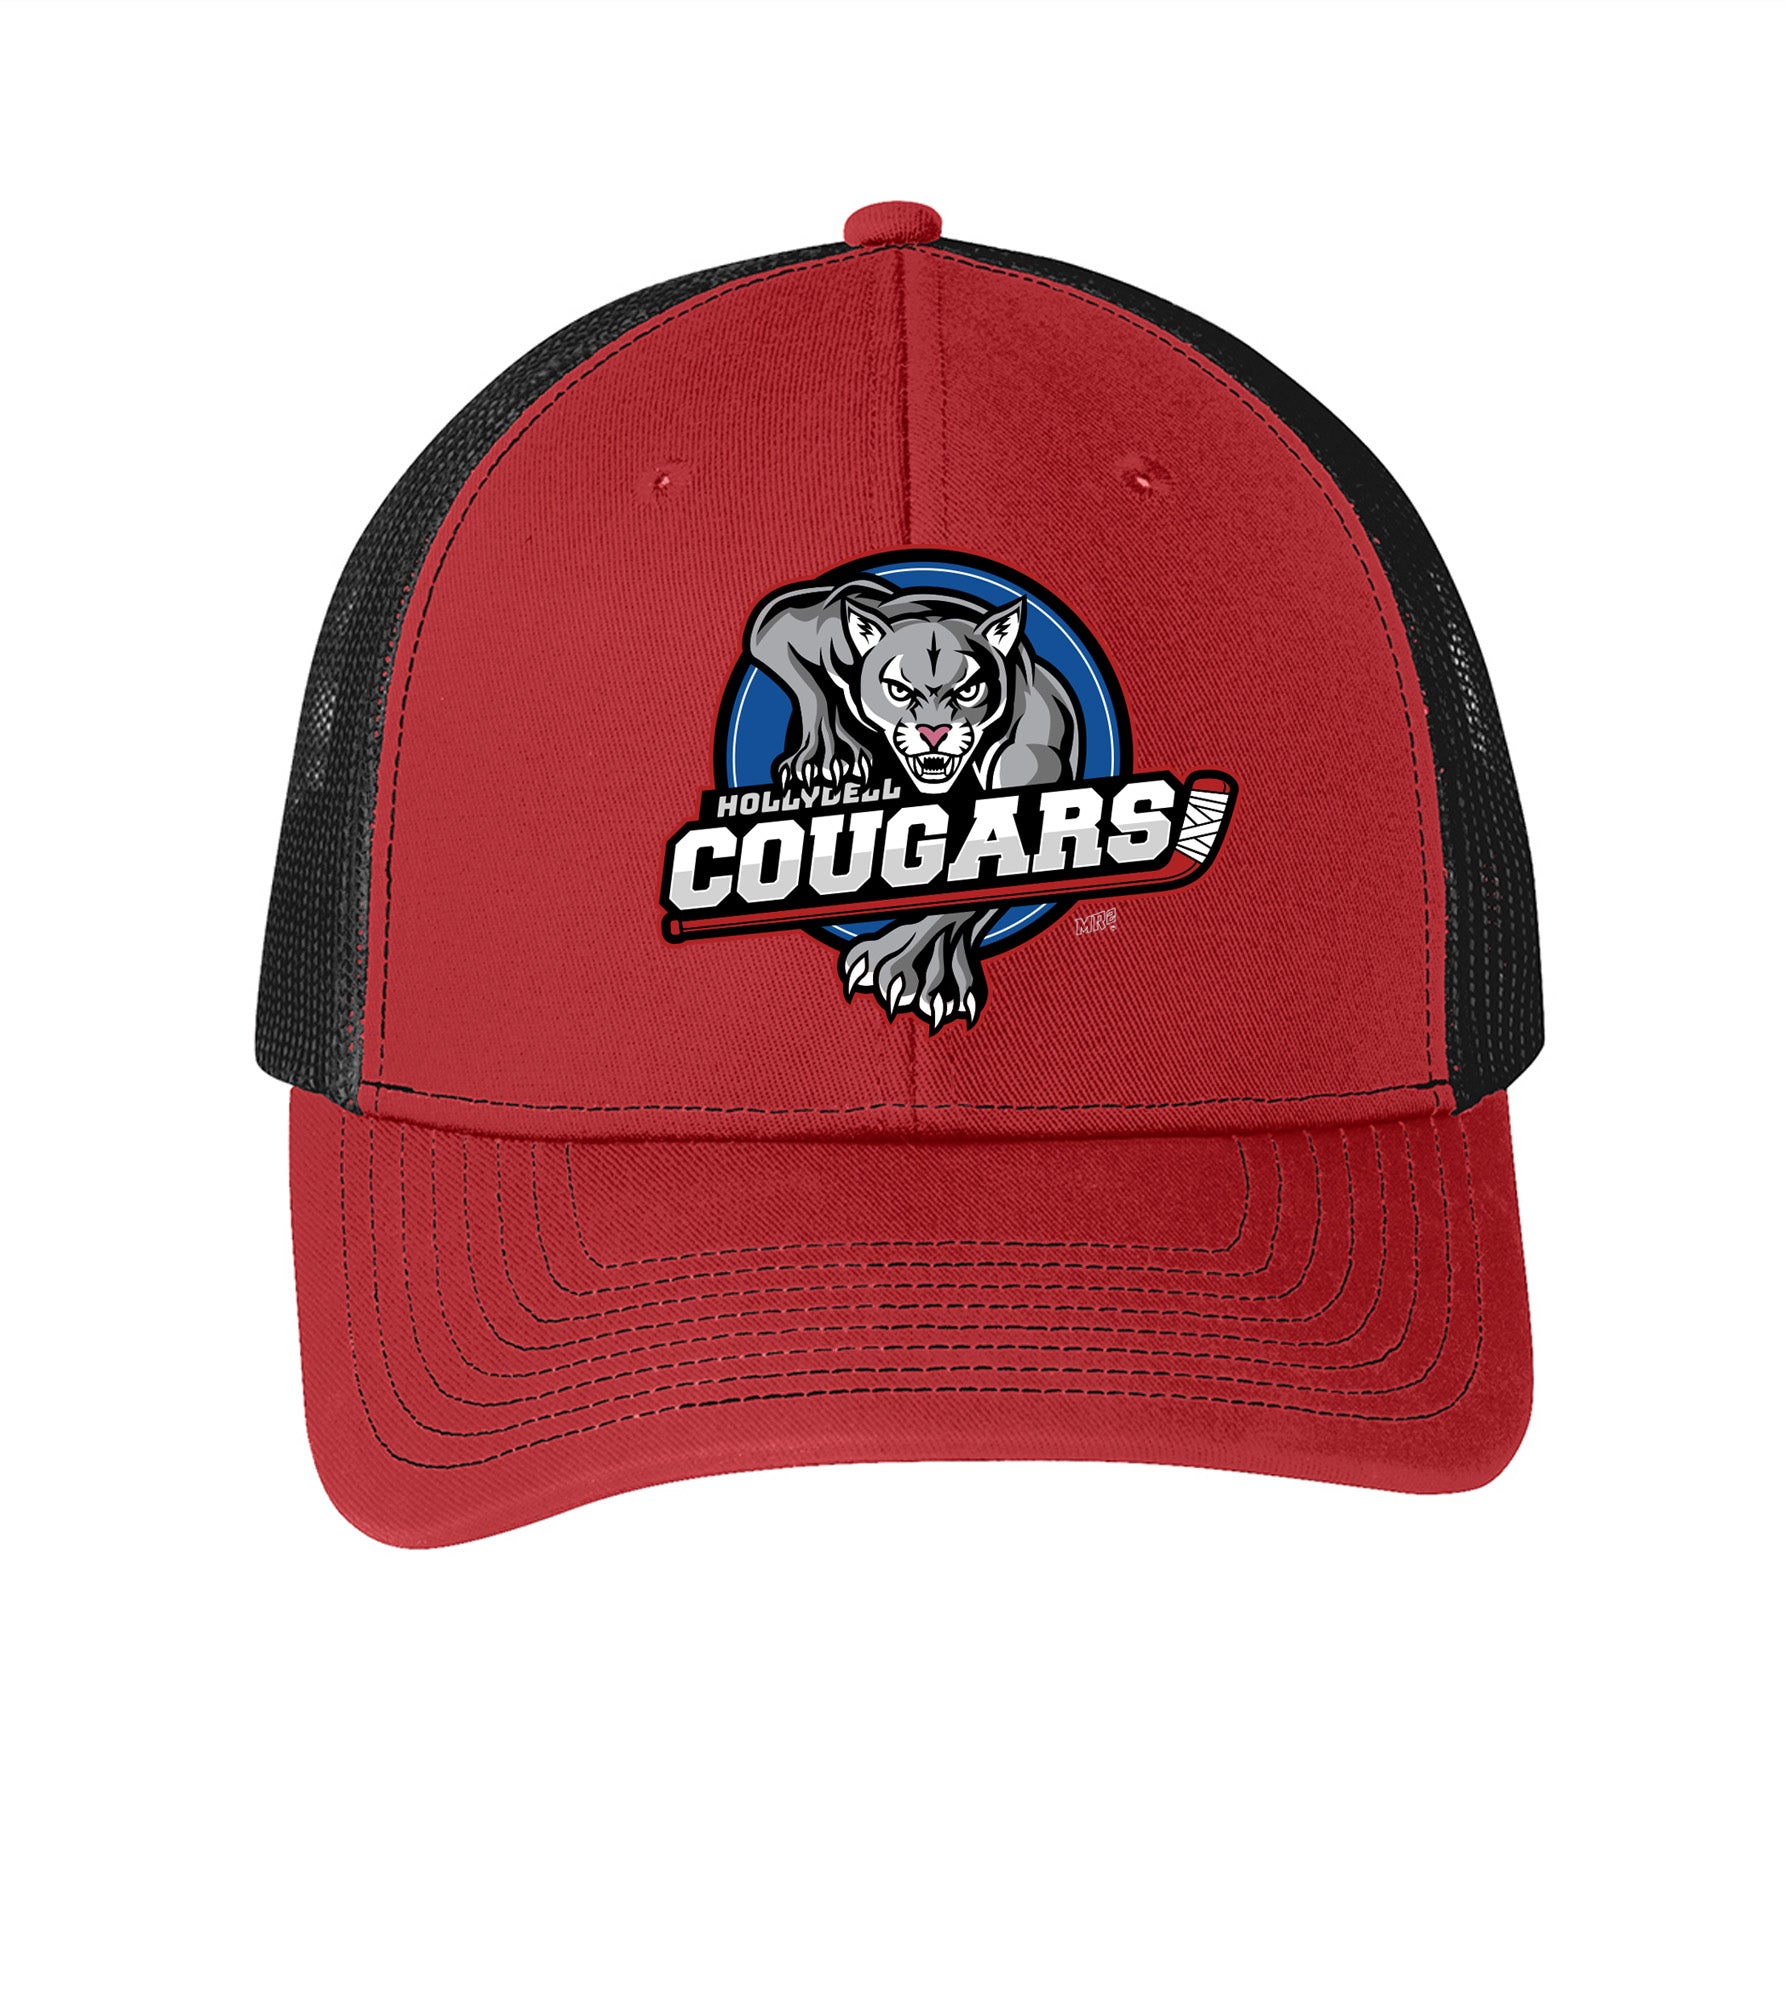 Cougars Trucker Hat - Red/Black